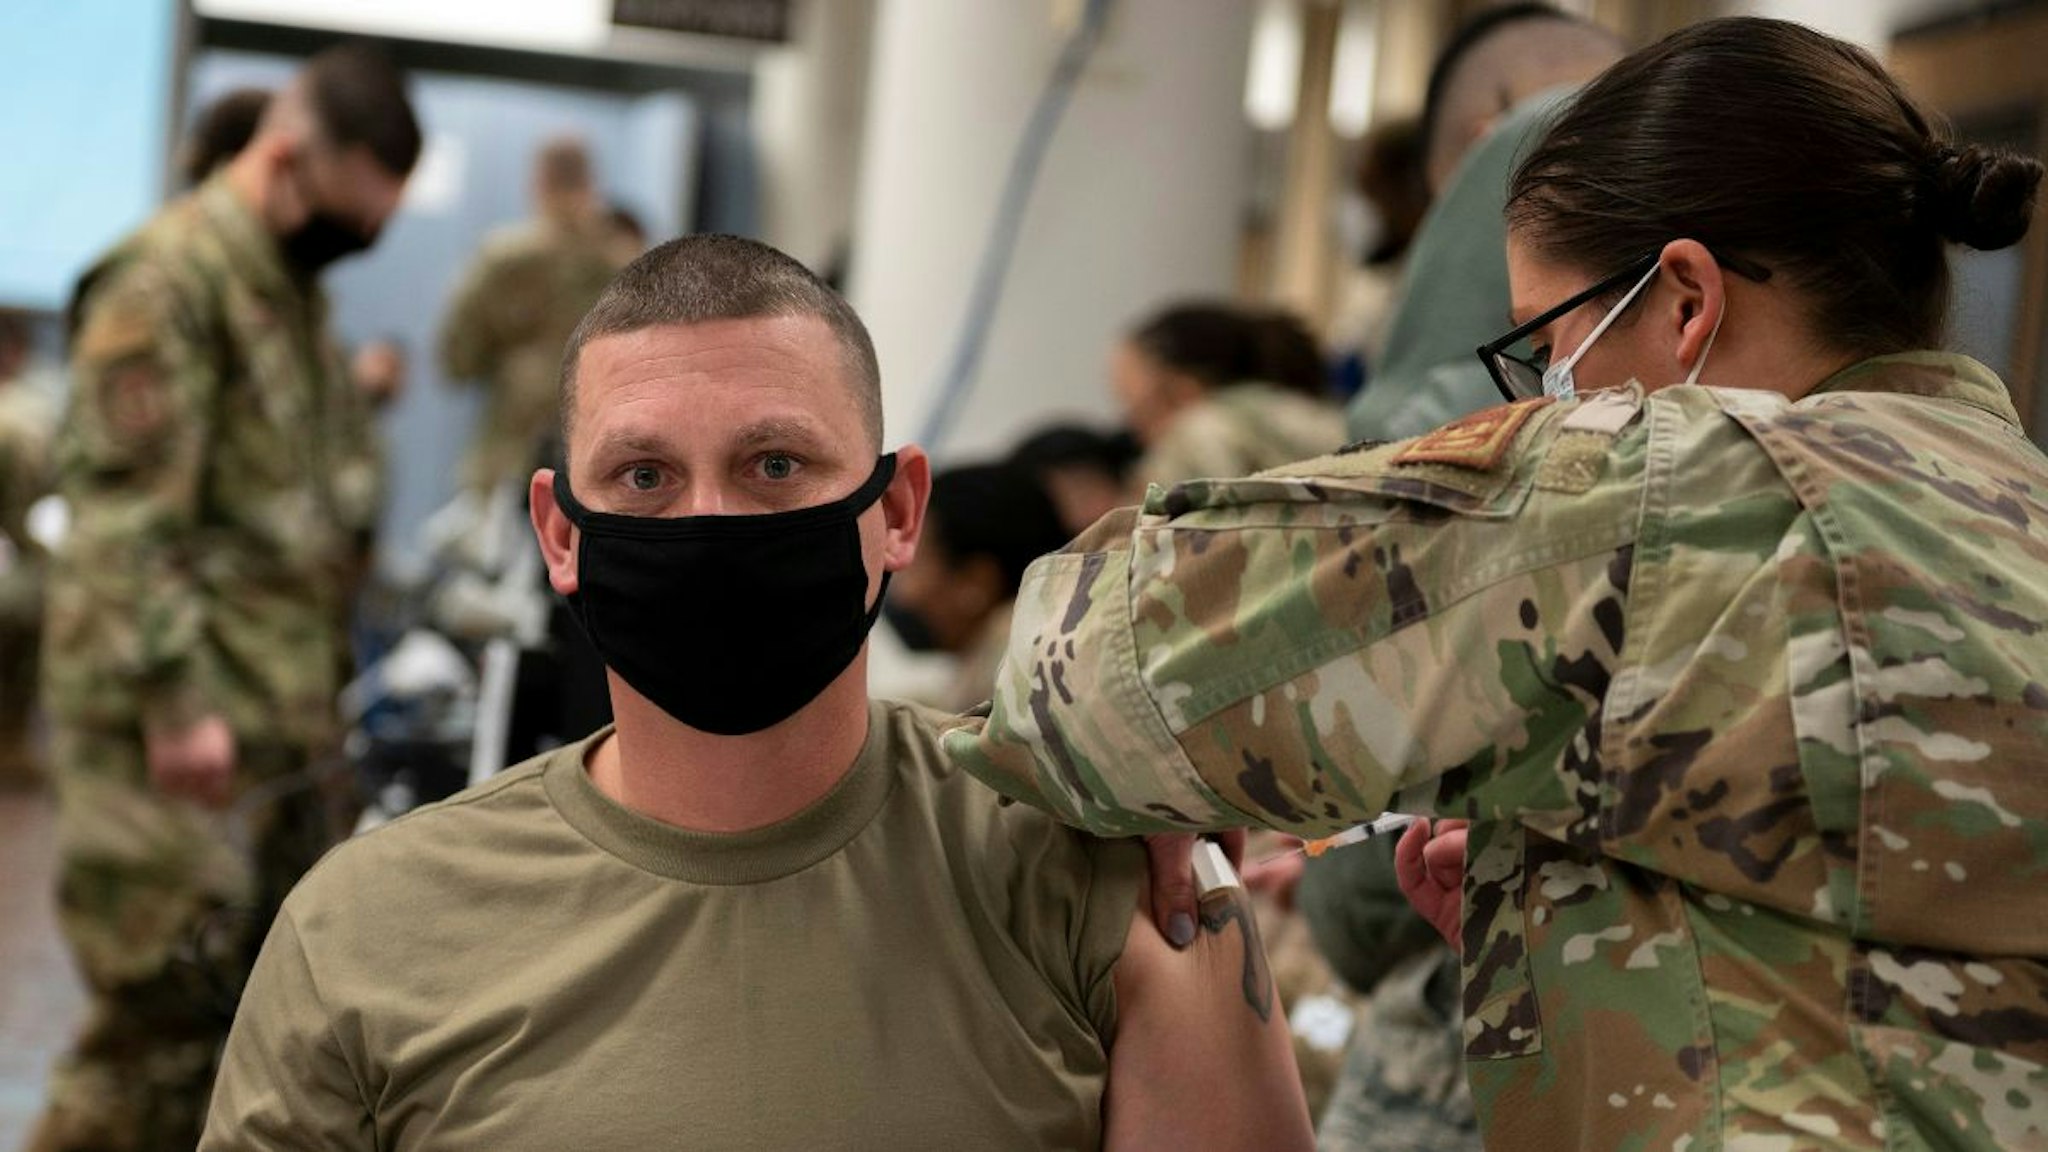 In this handout image provided by United States Forces Korea, U.S. Air Force Sgt. Gerald Allen receives a dose of the Moderna COVID-19 vaccine at Osan Air Base on December 29, 2020 in Pyeongtaek, South Korea.